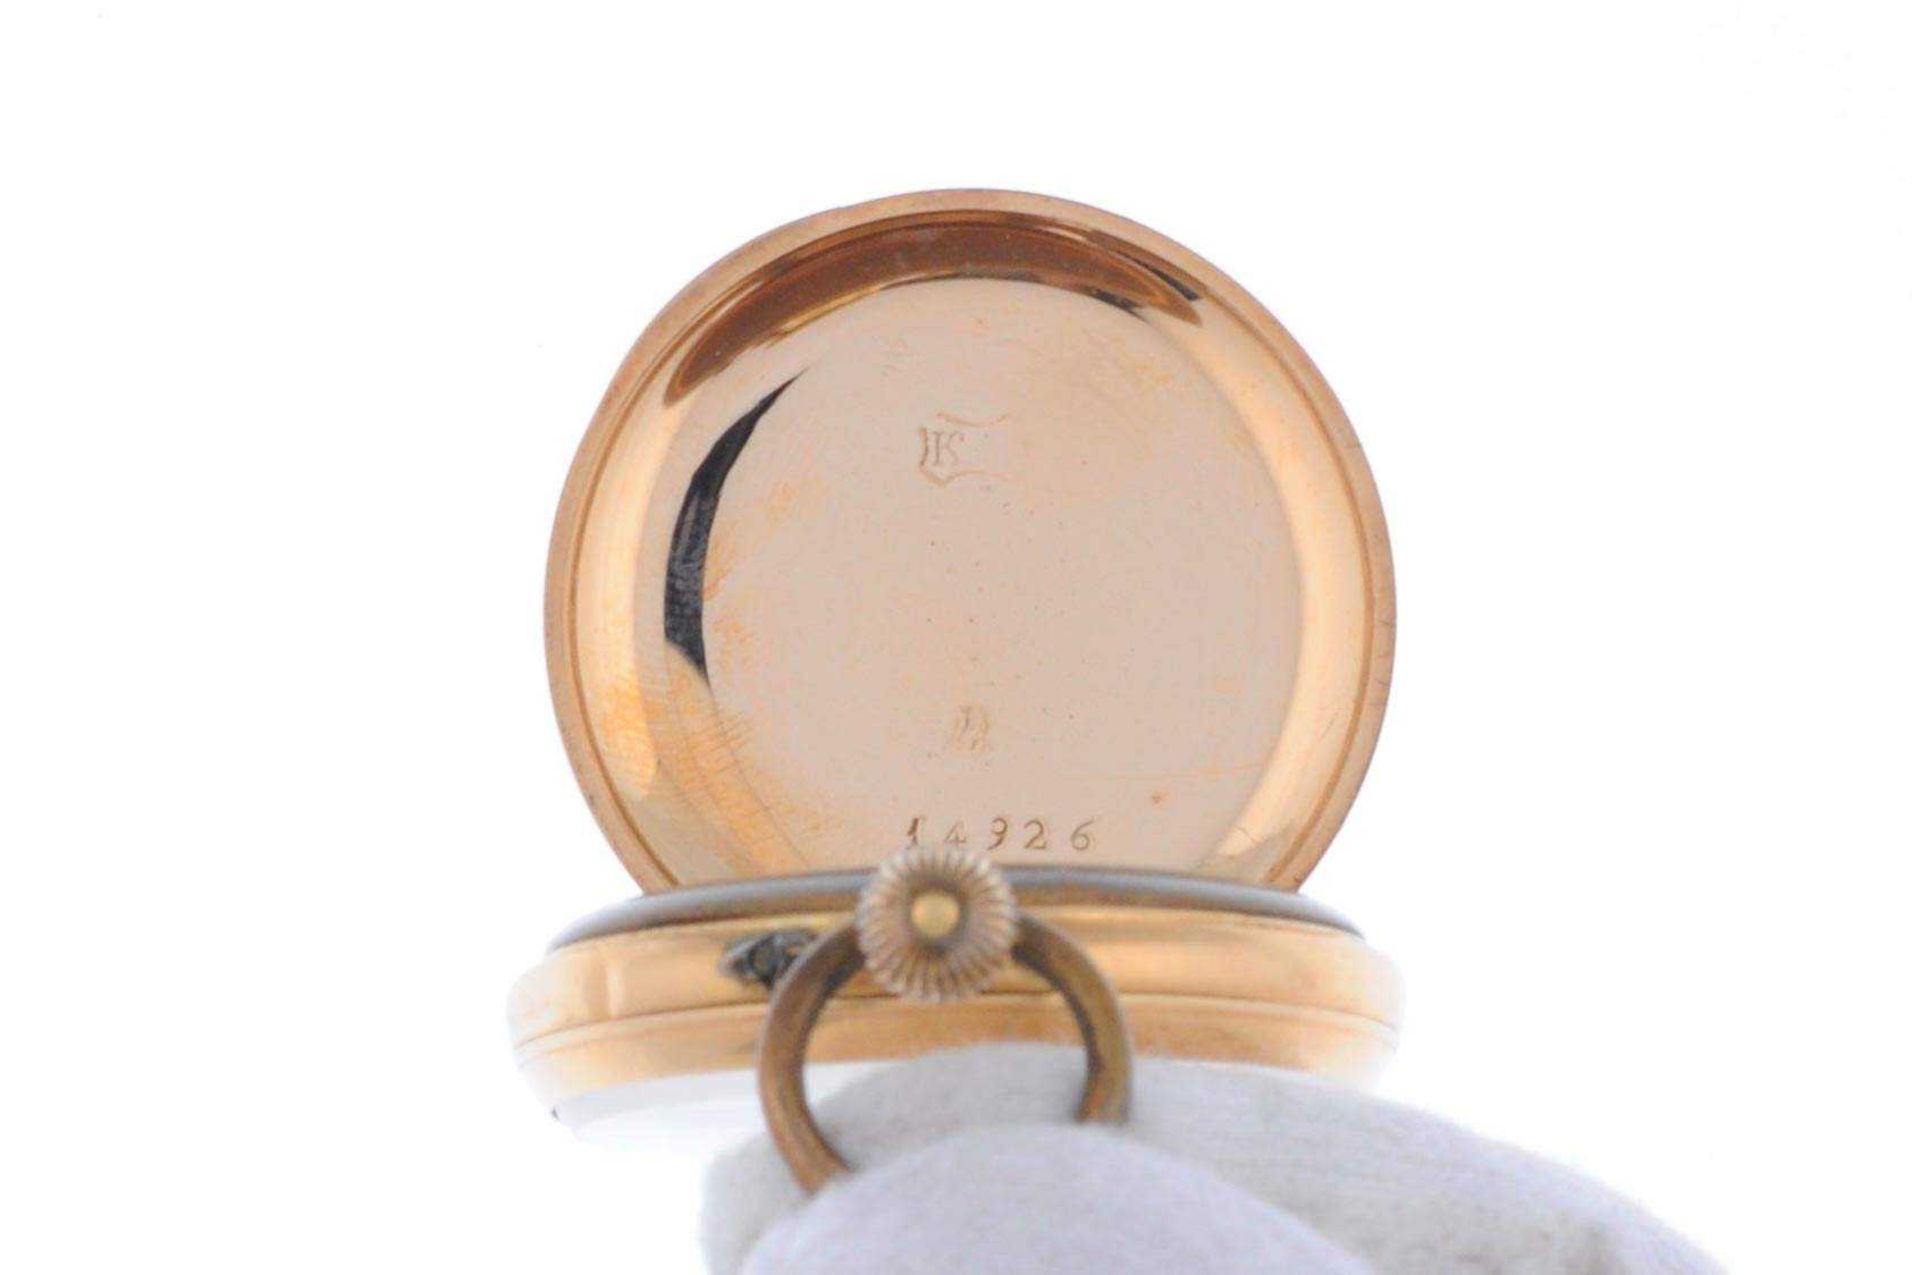 Pocket-watch Kollmar & Jourdan. Ca. 32, 2 mm, about 1880-1890, 585er Gold, gold-painted lever moveme - Image 4 of 5